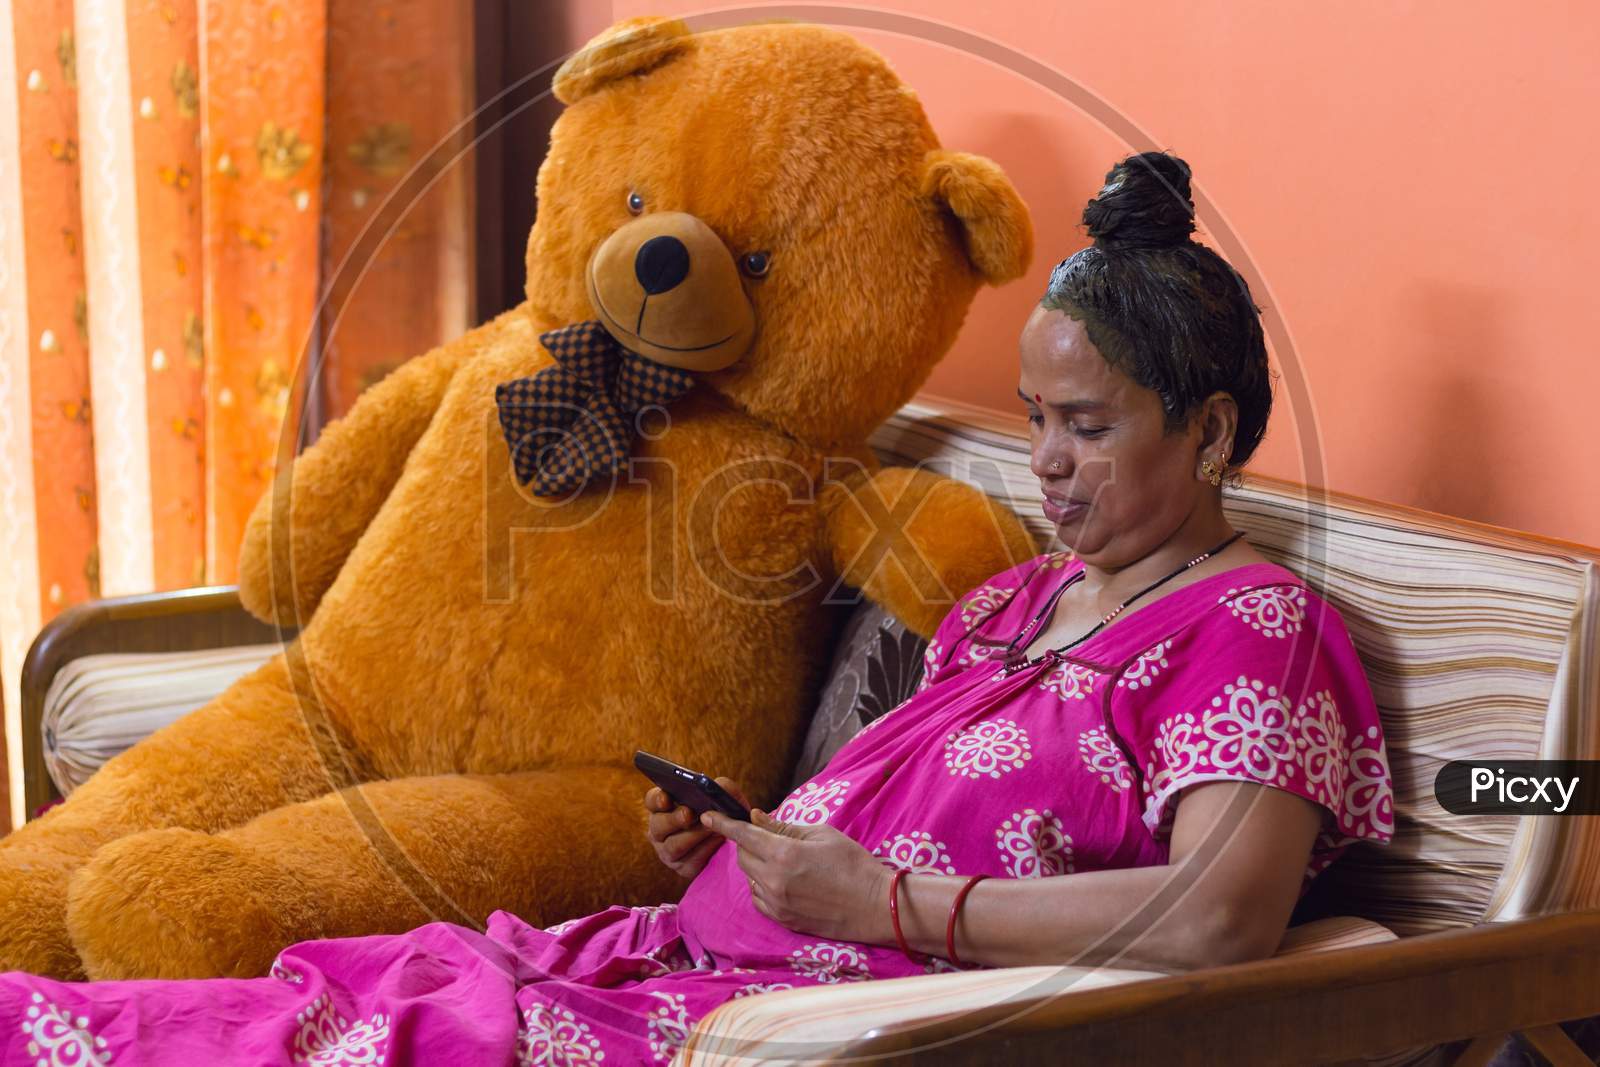 Senior Lady Has Applied Henna On Her Hair For Self Care. She Is Smiling And Watching Her Mobile Phone While Sitting On A Sofa Furniture Next To A Huge Orange Teddy Bear Indoors In Isolation.